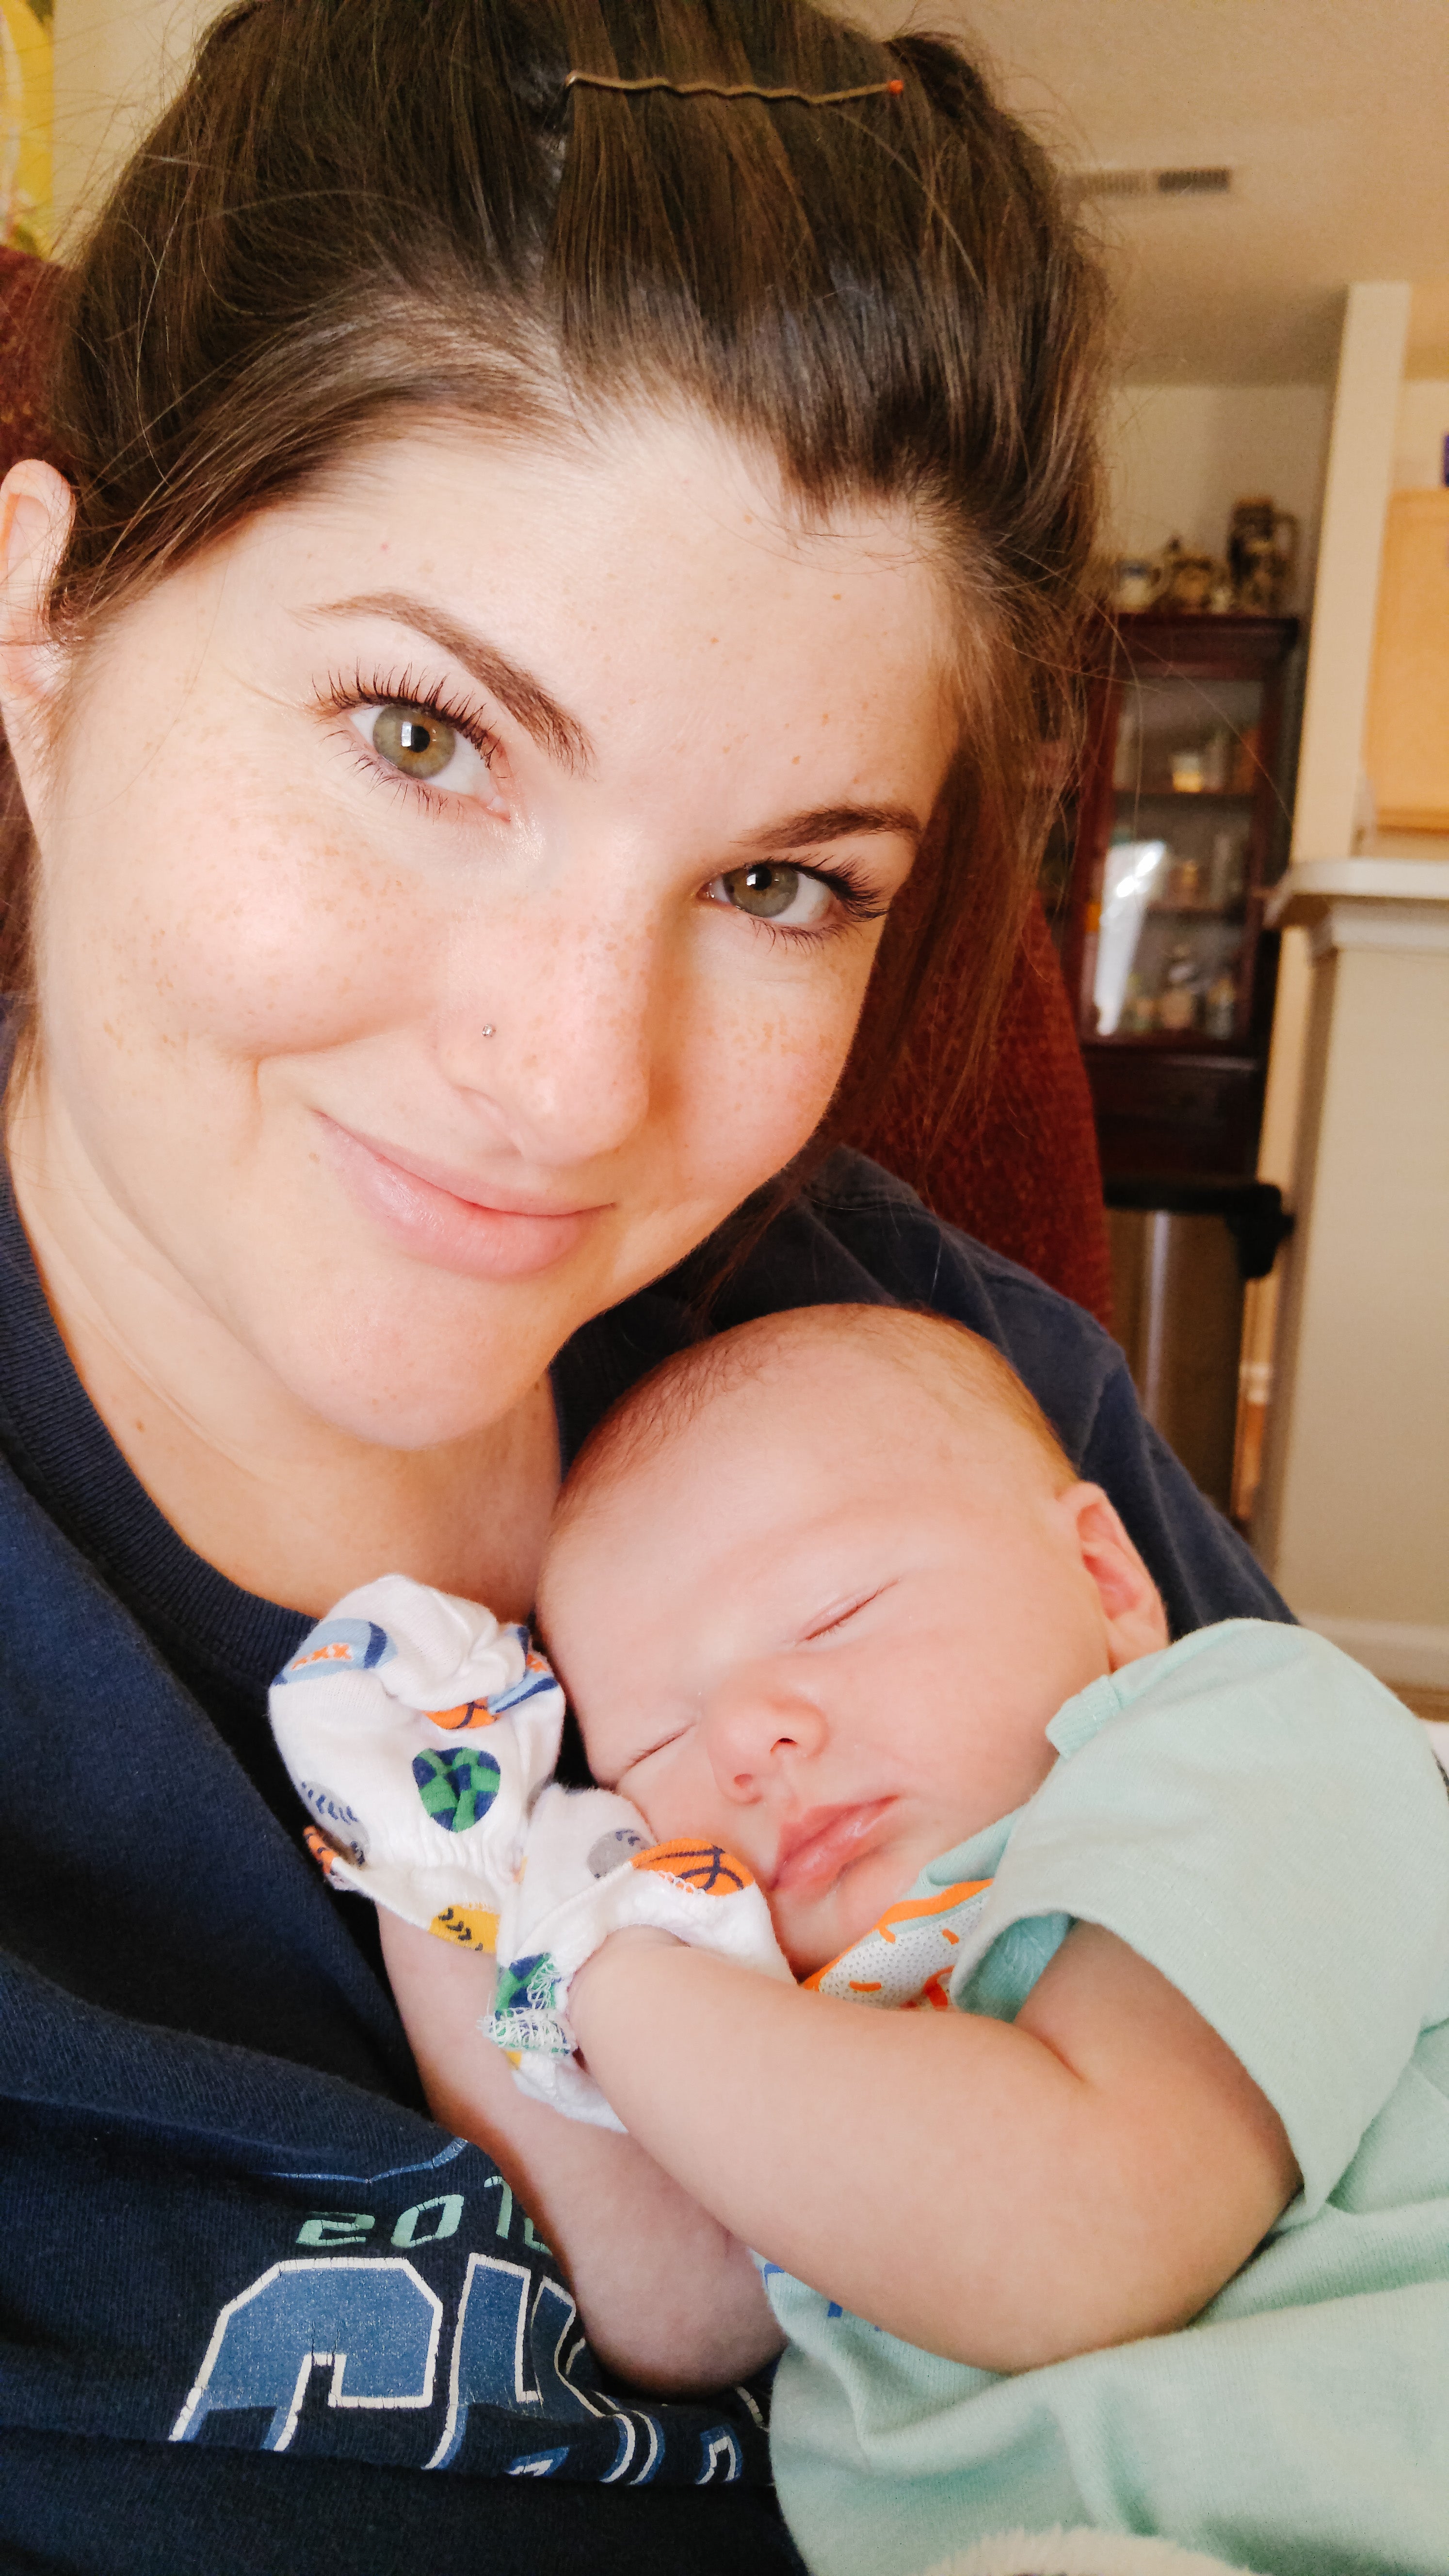 Healing Wounds I Didn’t Know I Had – My Full-Circle Breastfeeding Journey | Written by Amy Pruitt